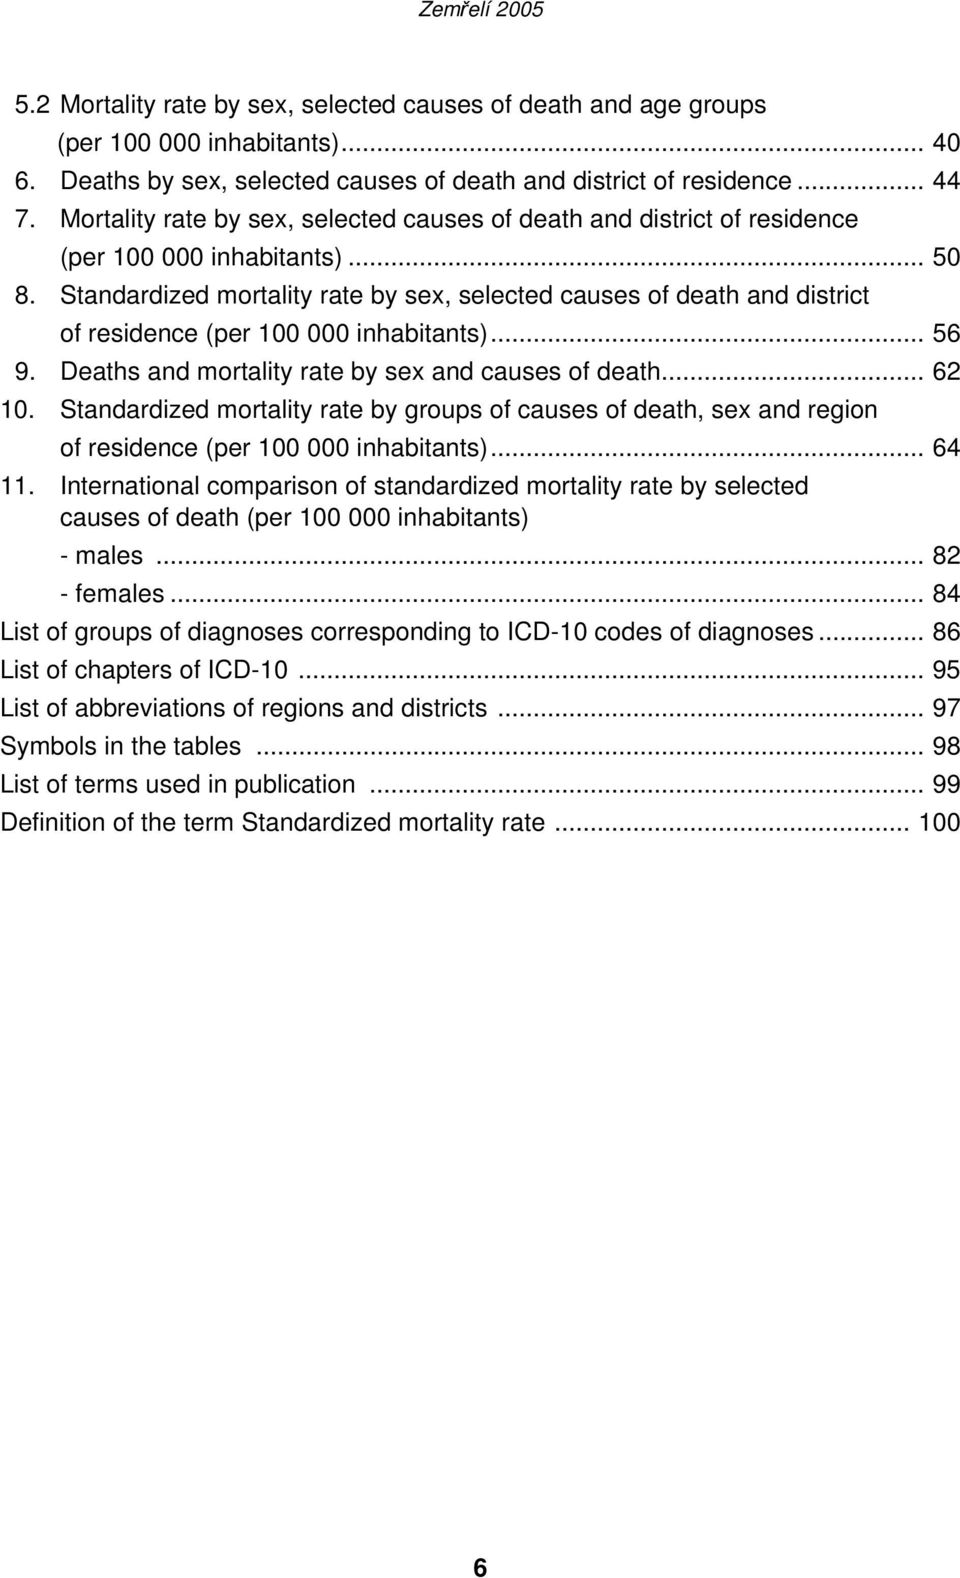 Standardized mortality rate by sex, selected causes of death and district of residence (per 100 000 inhabitants)... 56 9. Deaths and mortality rate by sex and causes of death... 62 10.